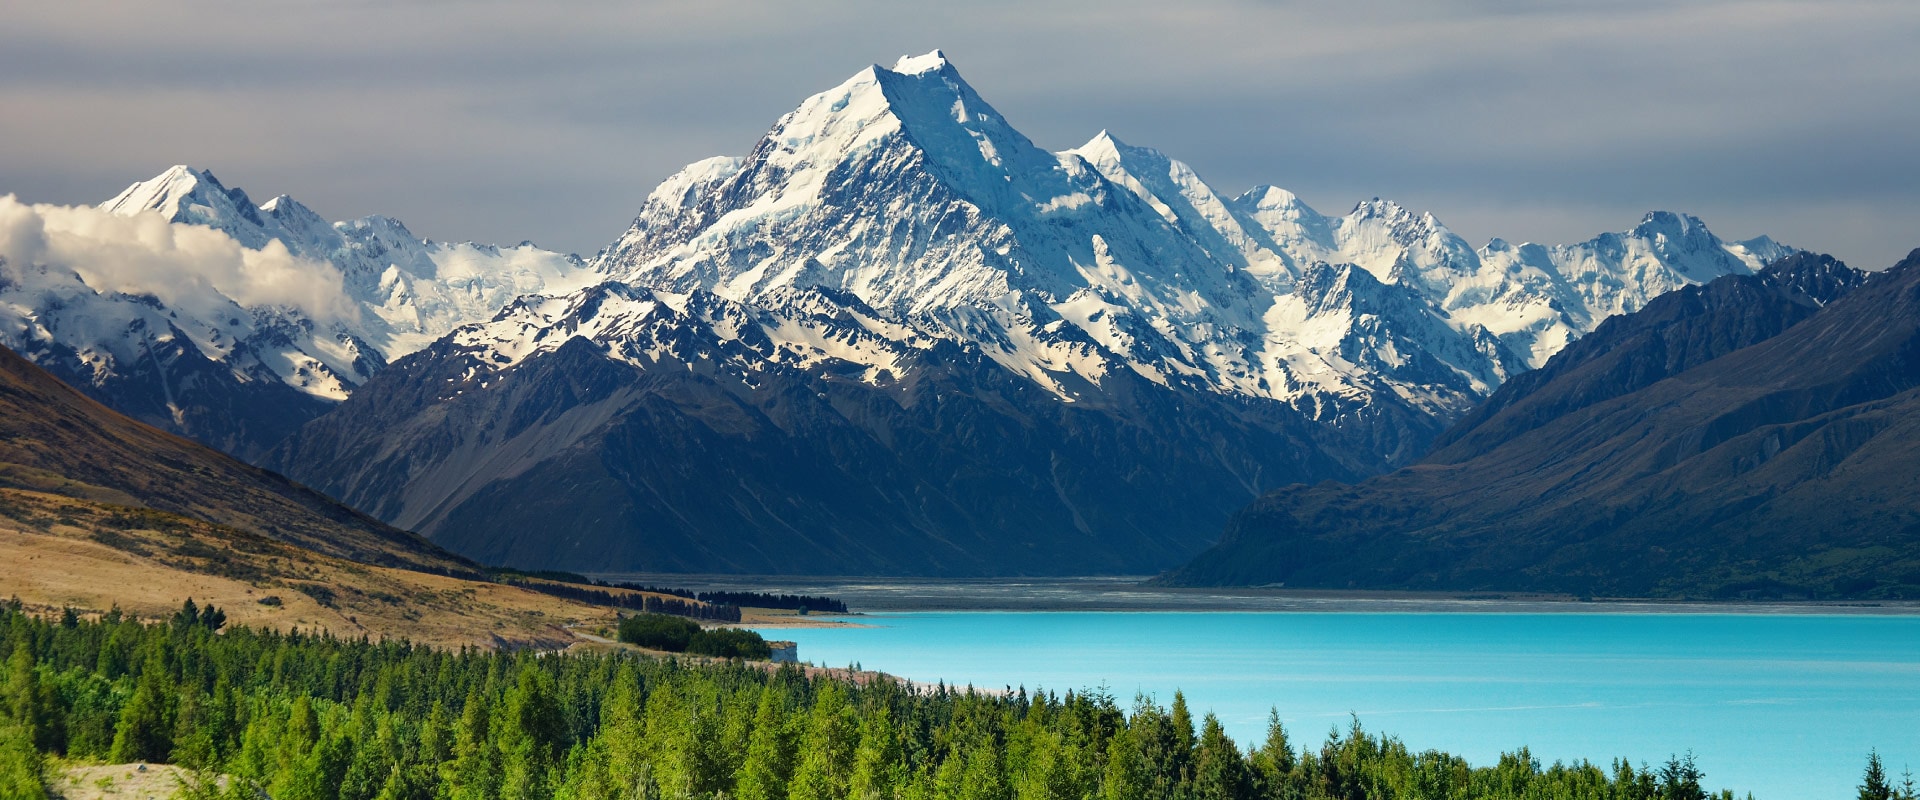 Snow capped Mt Cook with lake in foreground, New Zealand